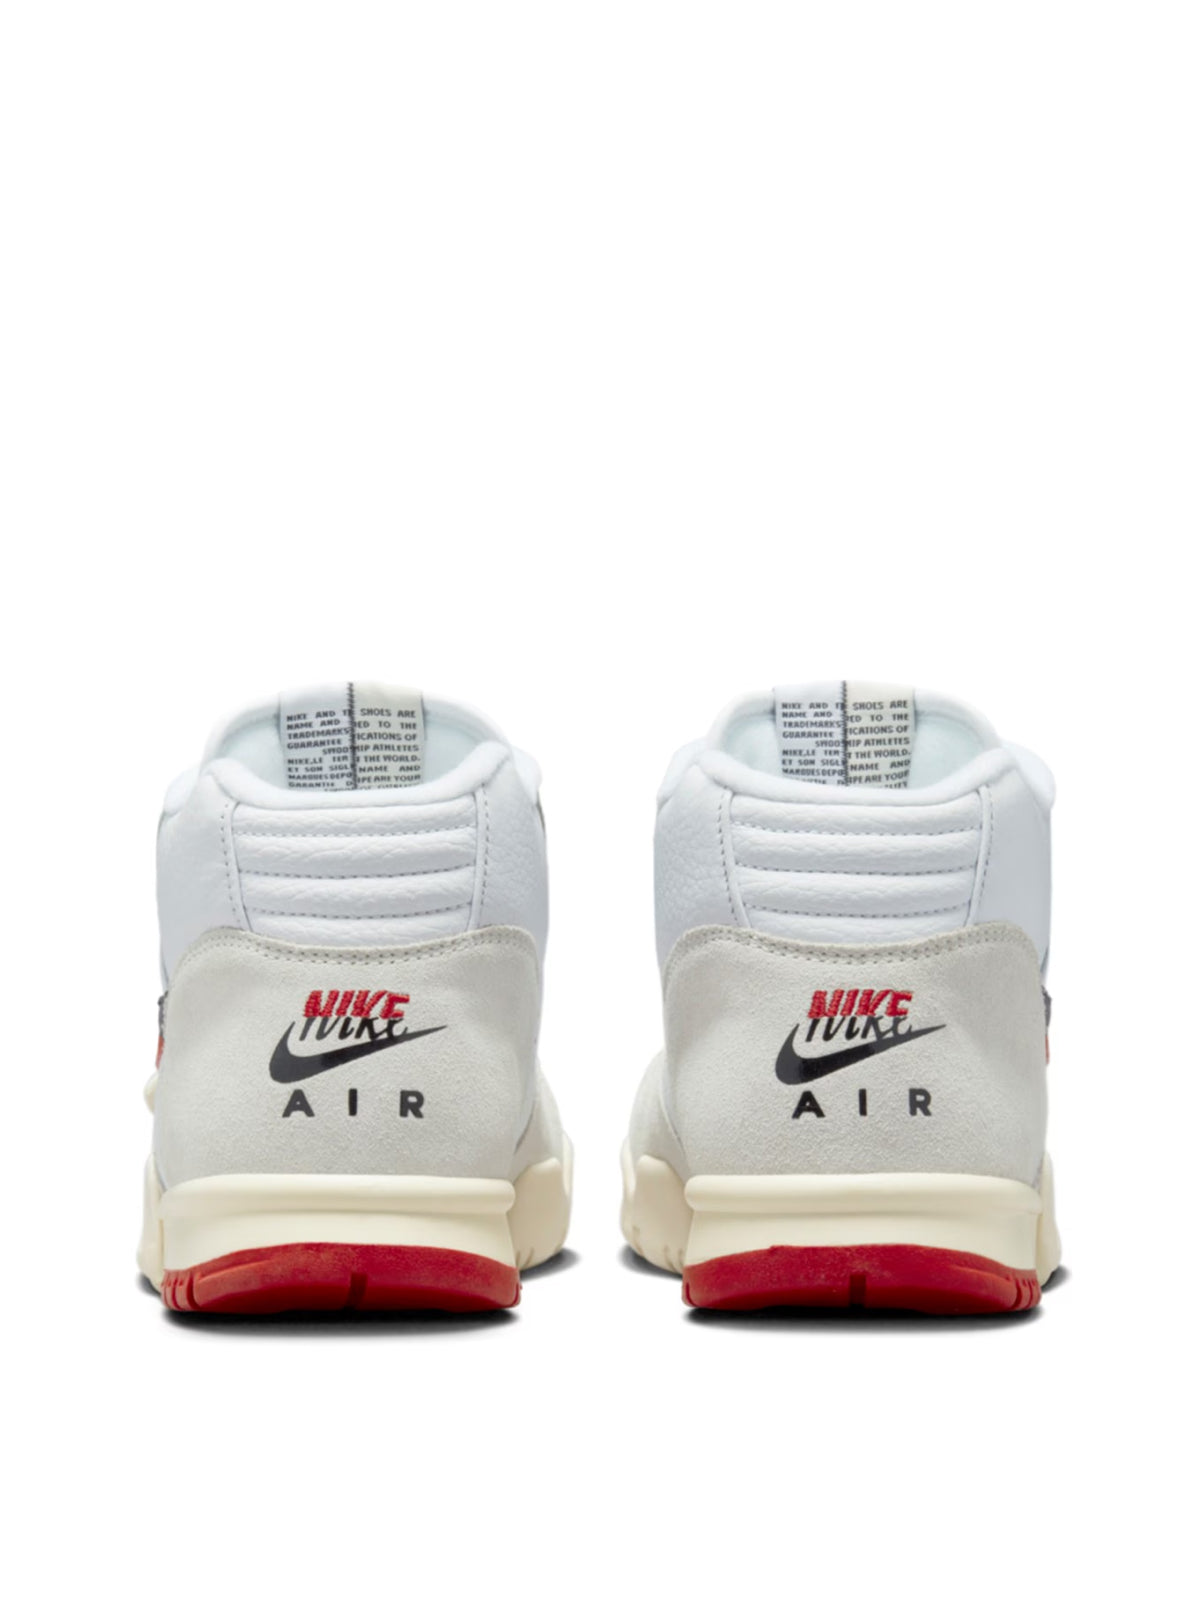 Nike-OUTLET-SALE-Air Trainer 1 'Chicago Split' Sneakers-ARCHIVIST